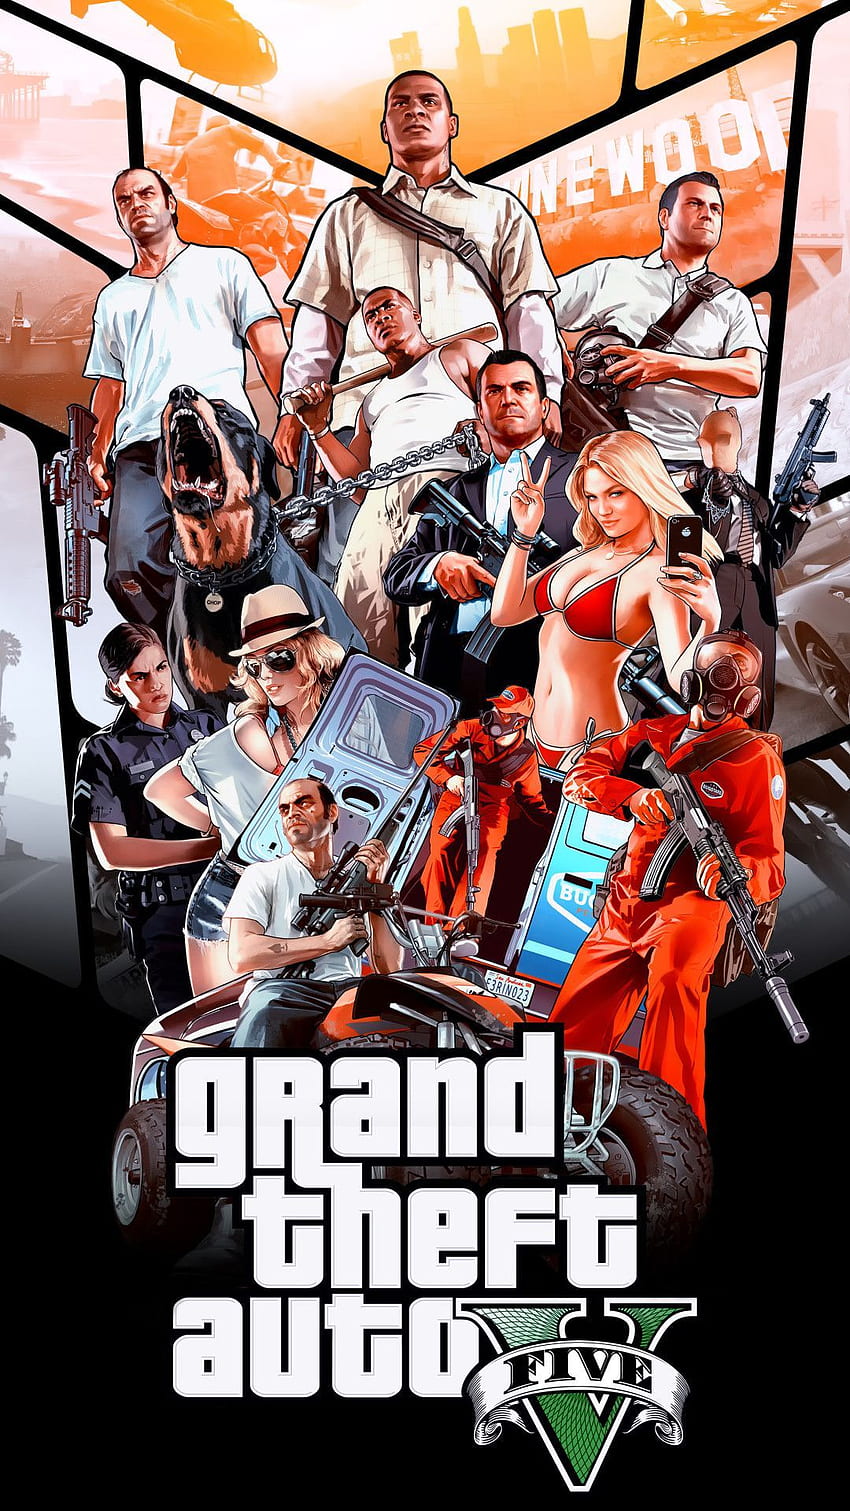 Gta V Poster Mobile (iPhone, Android, Samsung, Pixel, Xiaomi) in 2020. Grand theft auto, Grand theft auto artwork, Grand theft auto series HD電話の壁紙